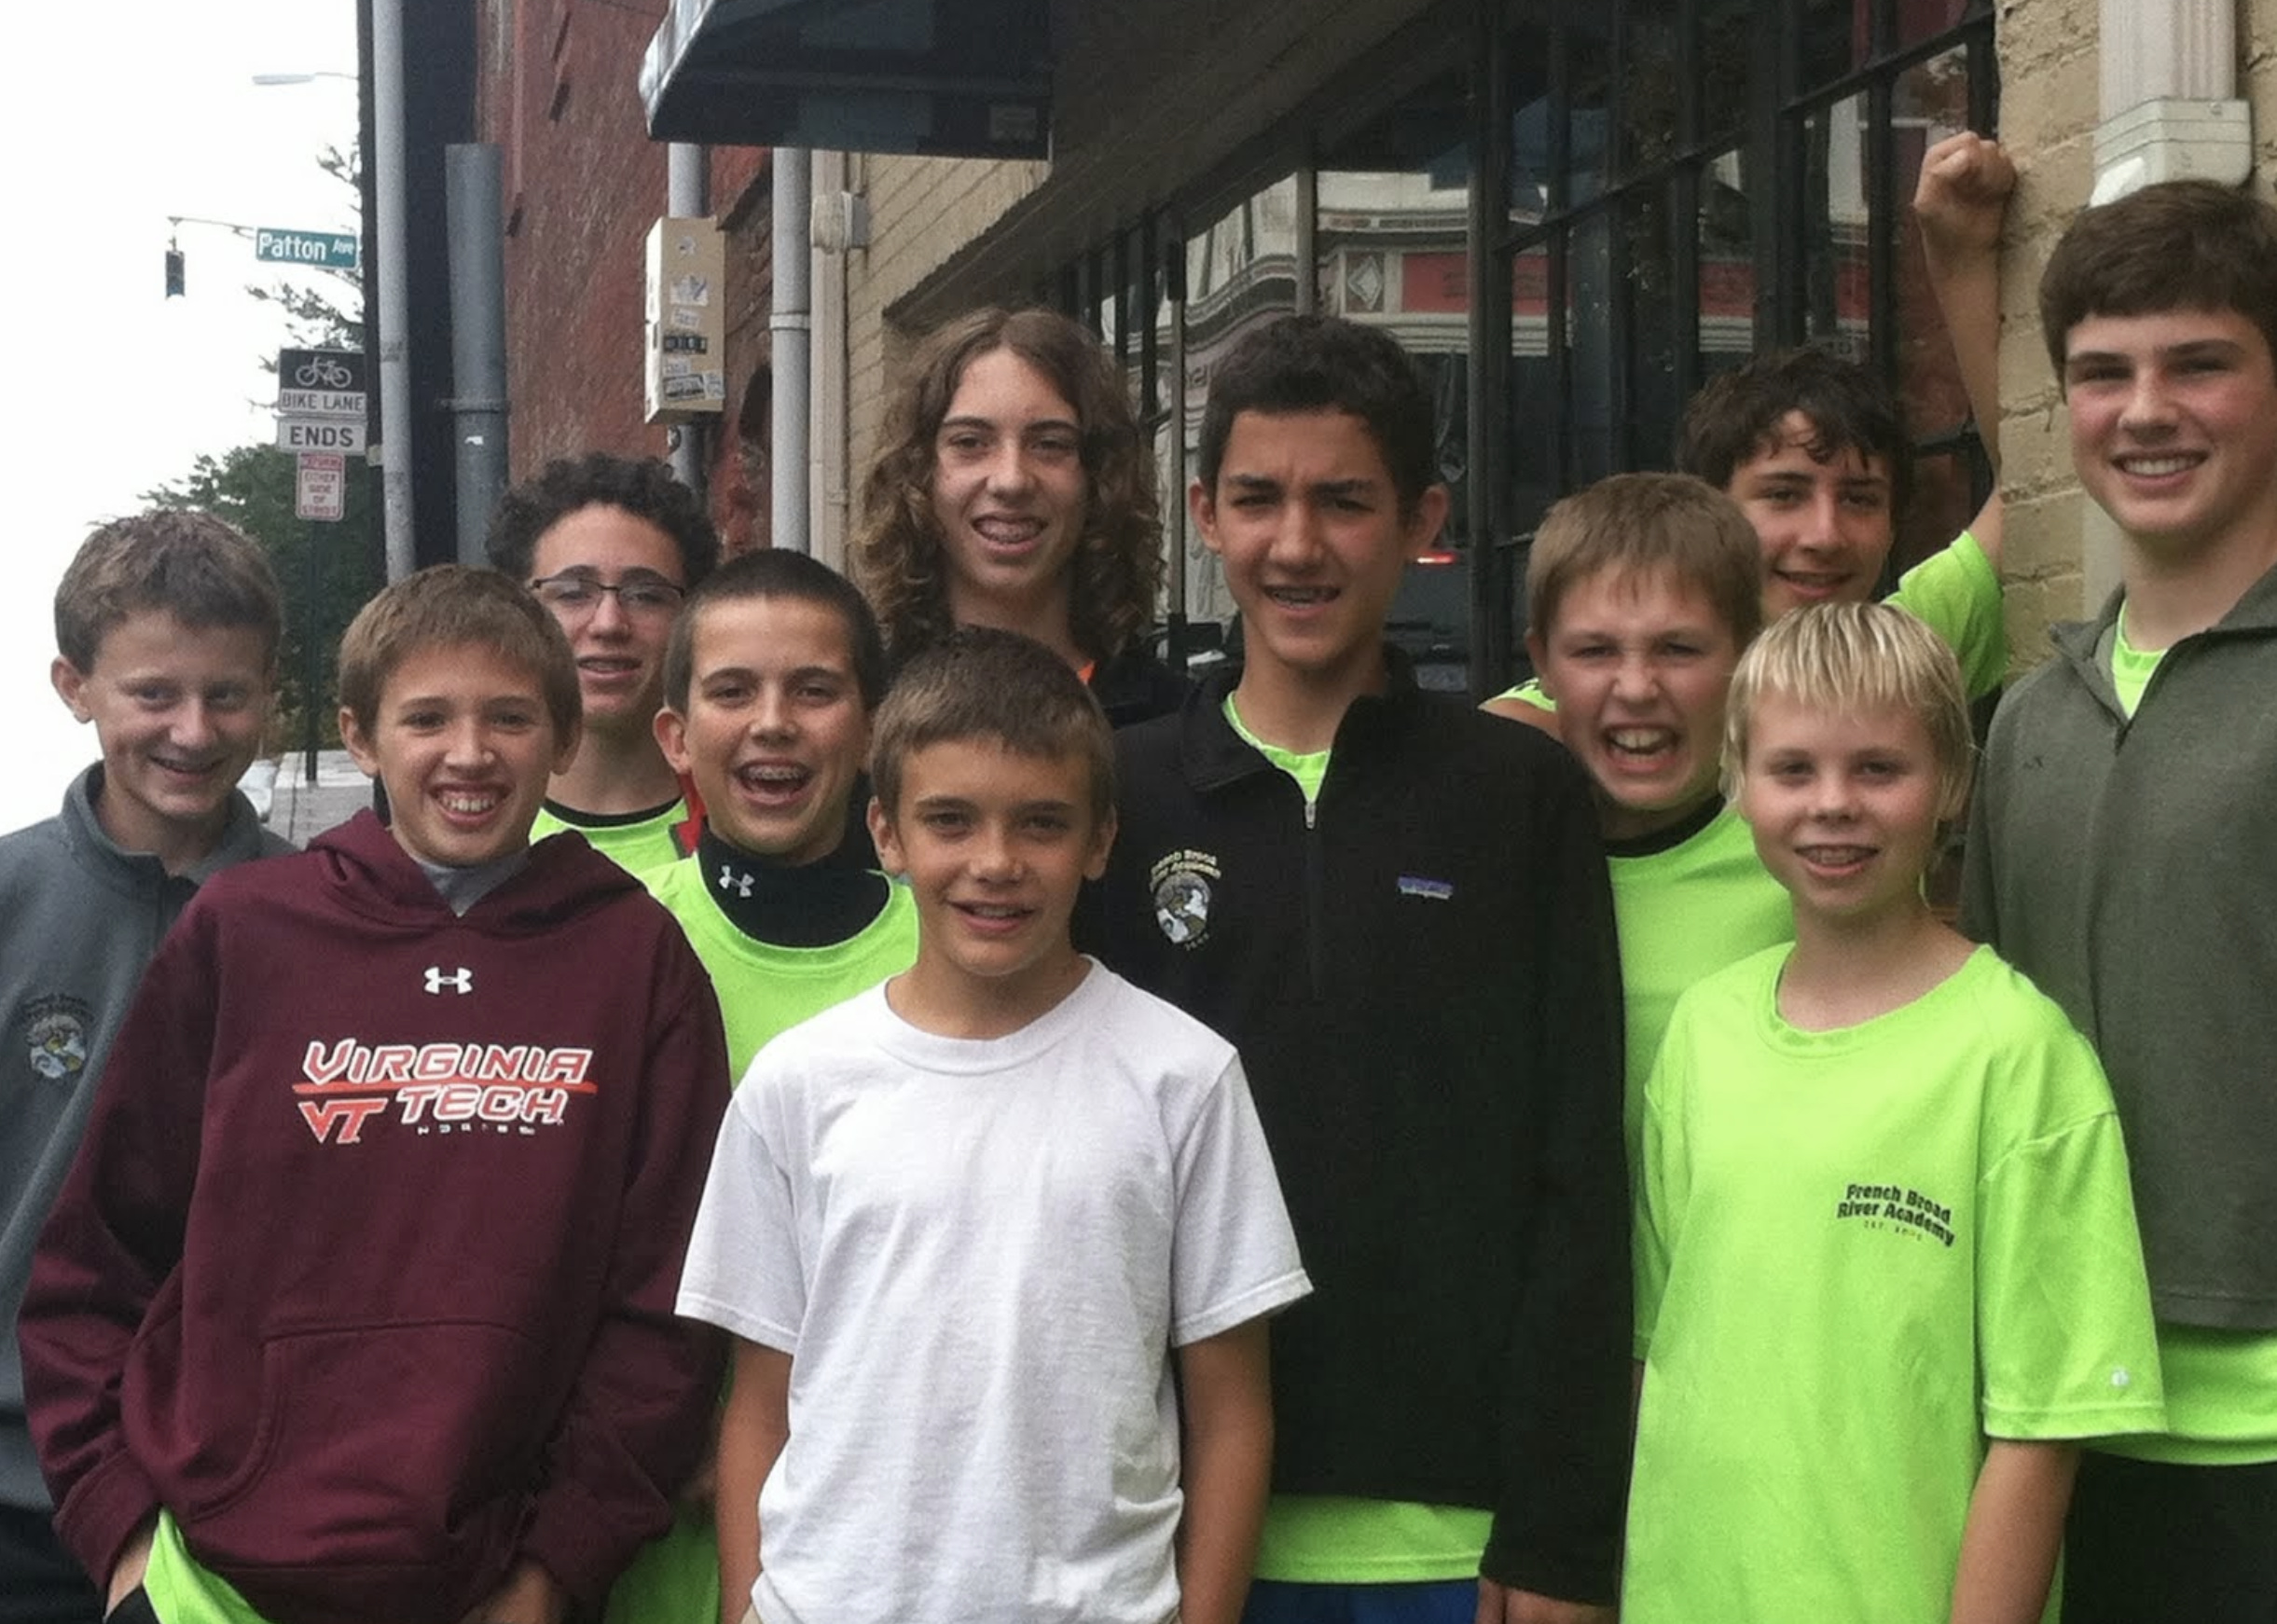 Connor and the FBRA Boys Class of 2014 during a field trip downtown.